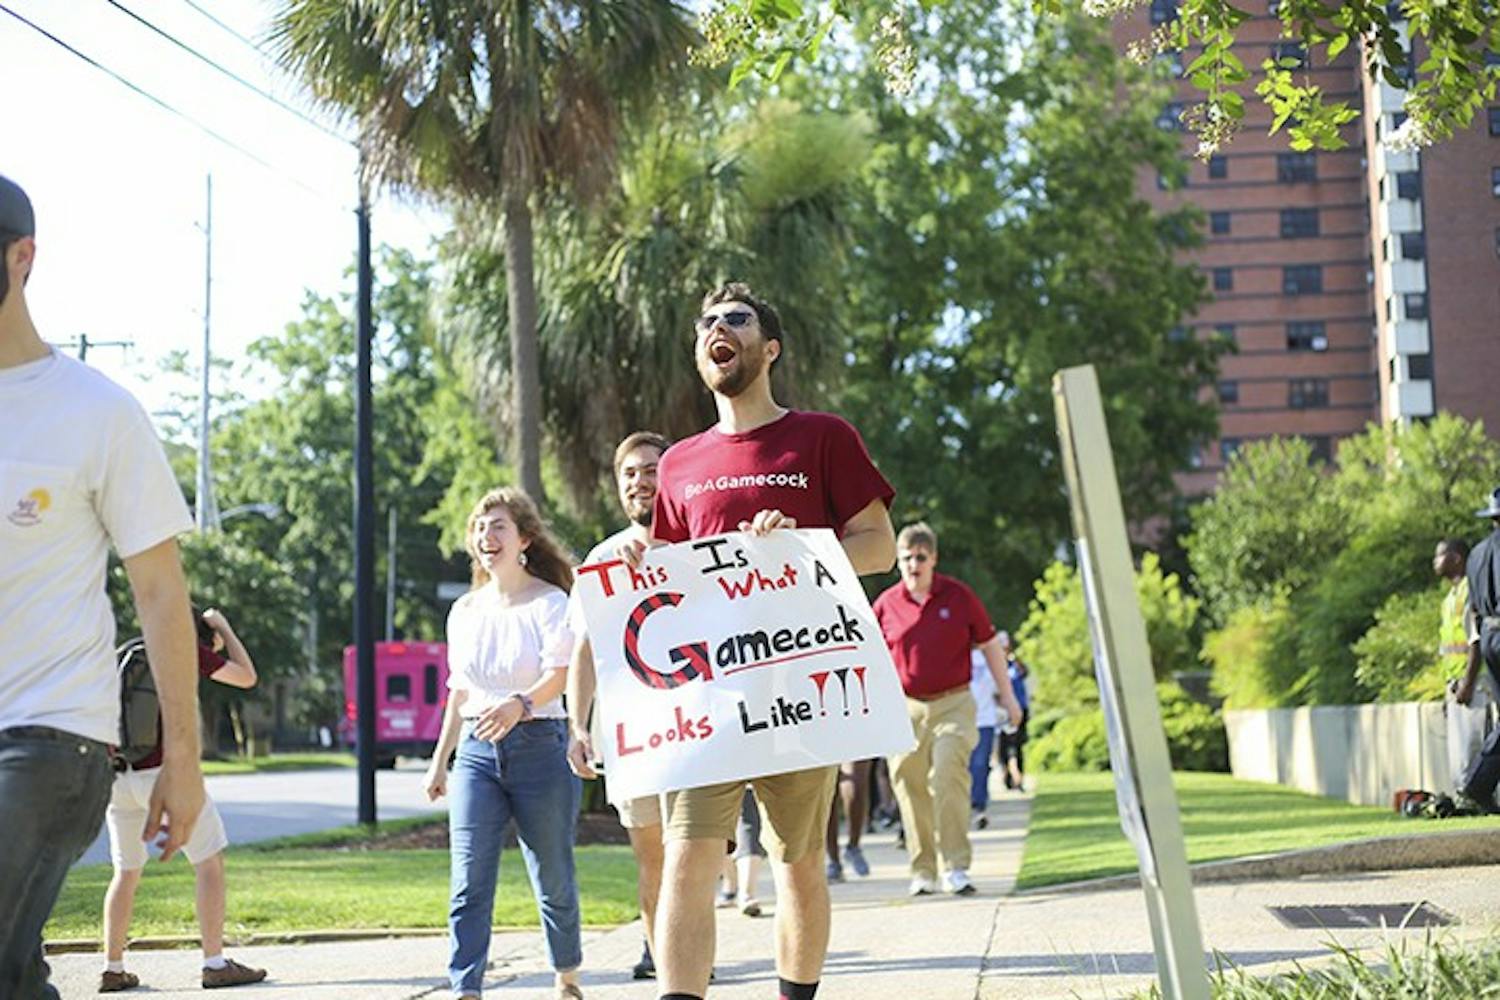 A rally protesting the board of trustees upcoming vote on Friday was held on Wednesday on the Russell House patio. City leaders, alumni, students and faculty spoke out against Gov. Henry McMaster's involvement in the decision of 鶹С򽴫ý's next president. On Friday, students and faculty marched from Russell House to the Alumni Center for the Board's decision. Bob Caslen was chosen to serve as the 29th president of the university.&nbsp;